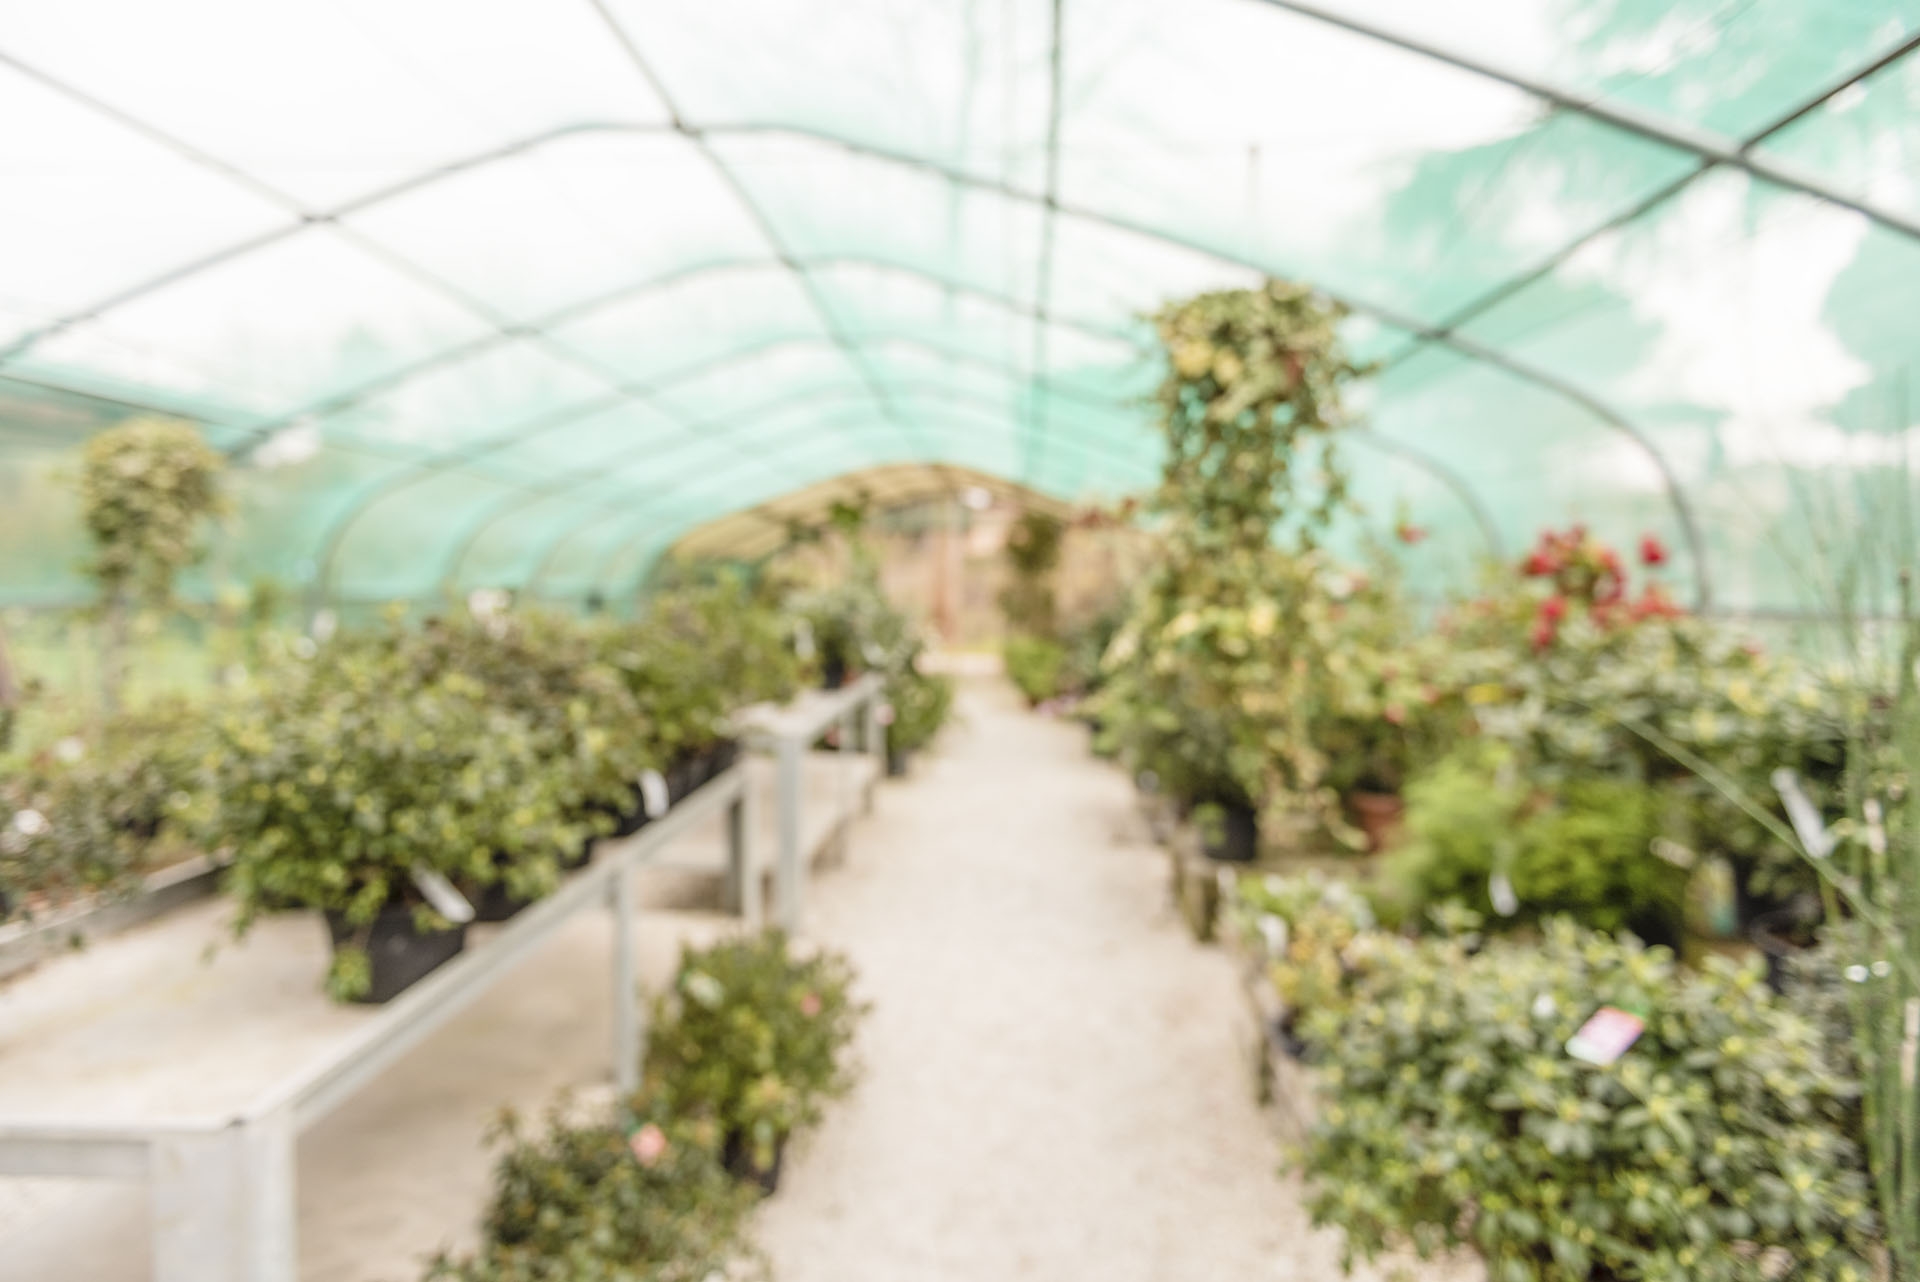 Defocused background with interiors of a greenhouse